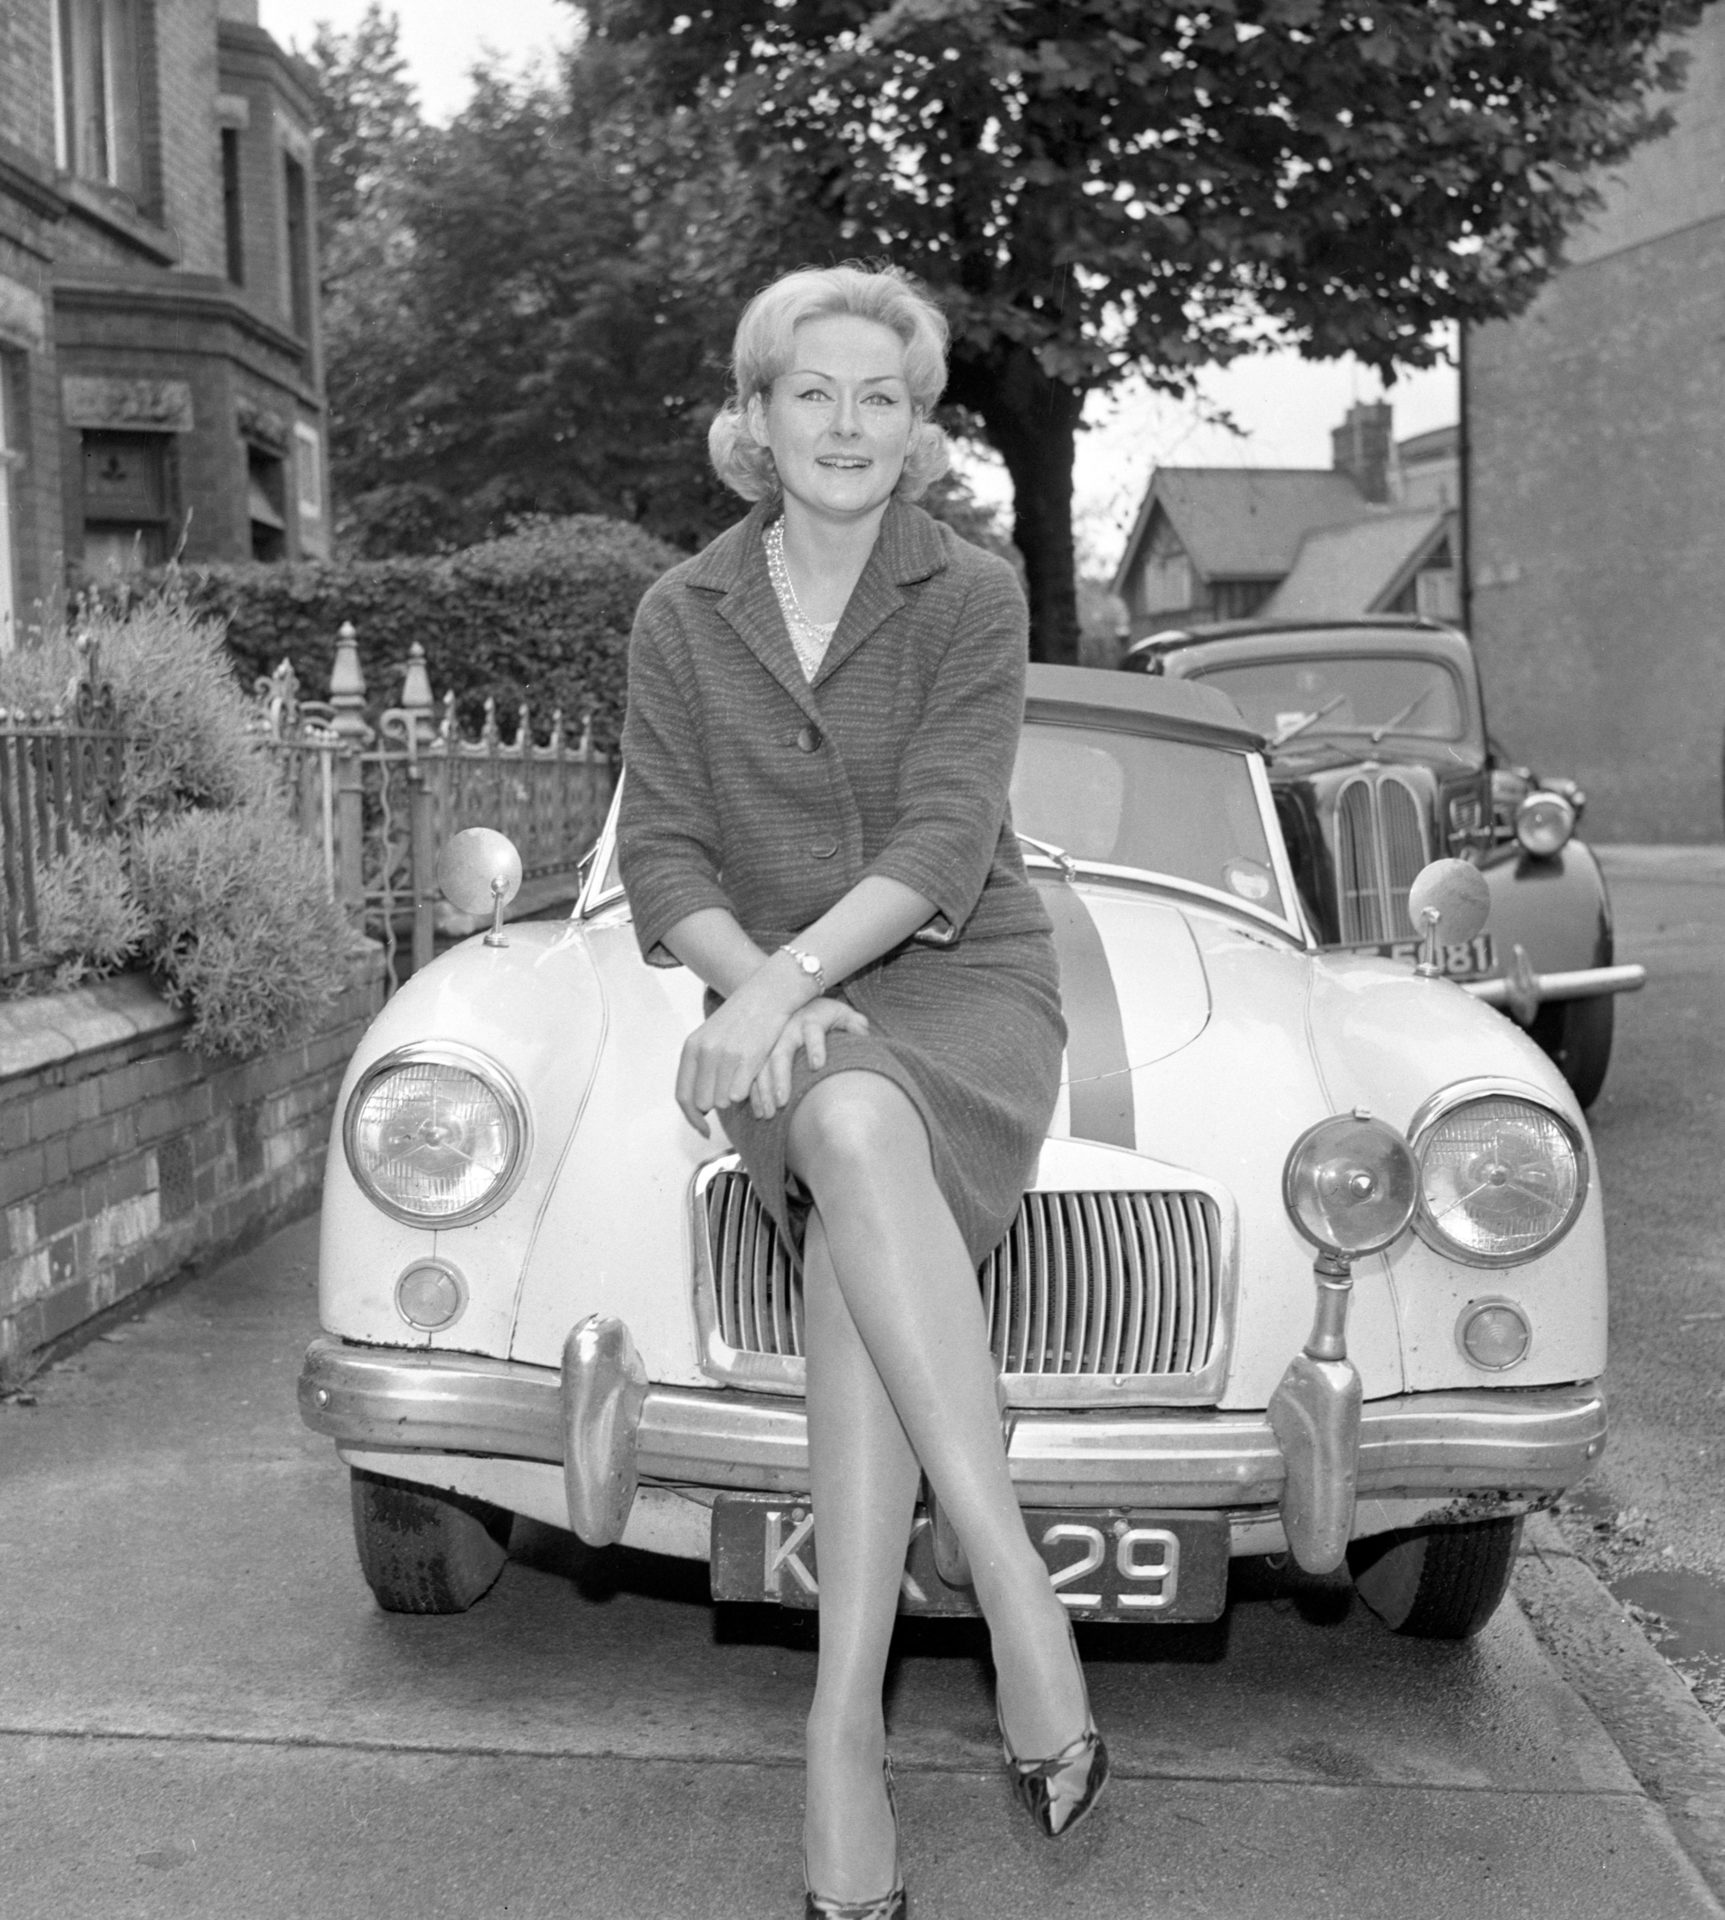 Rosemary Smith is pictured ahead of the Monte Carlo Rally, 17-1-1963.